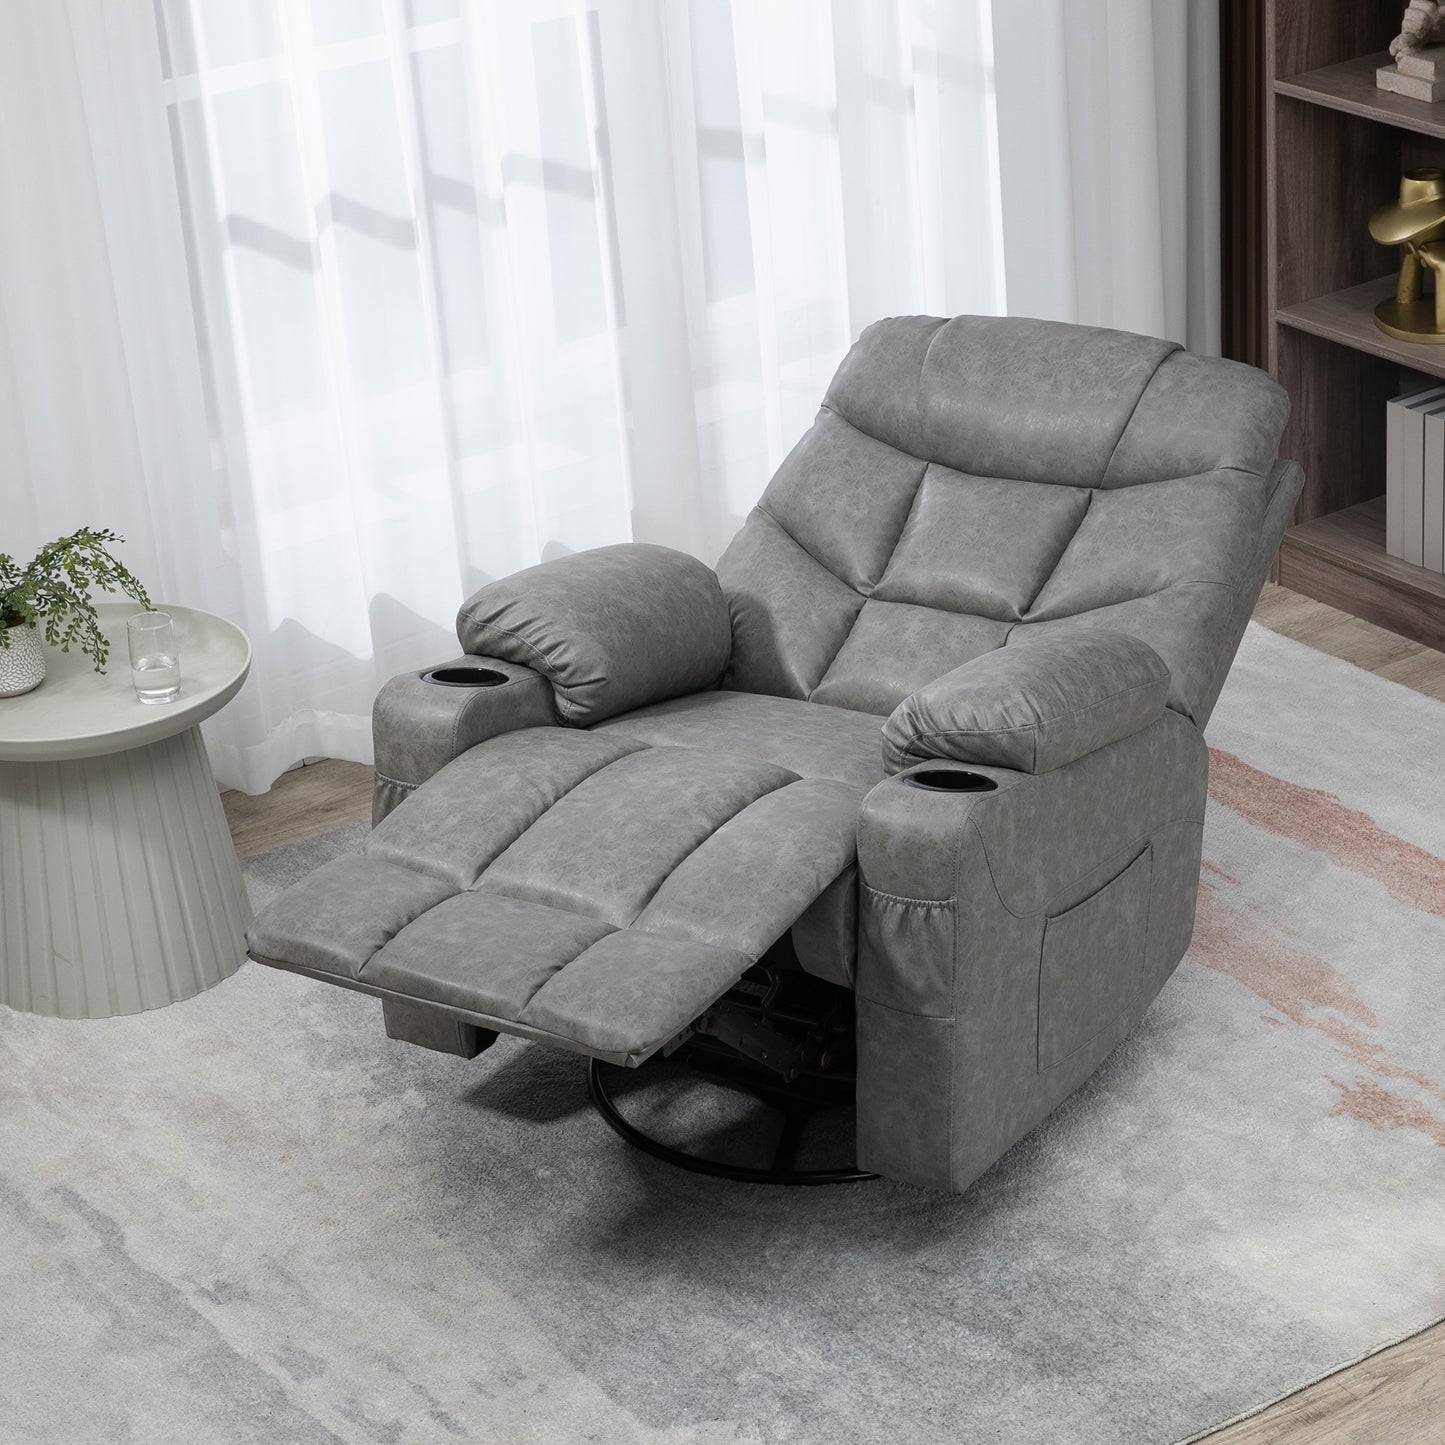 HOMCOM Manual Reclining Chair, Recliner Armchair with Faux Leather, Footrest, Cup Holders, 86x93x102cm, Grey